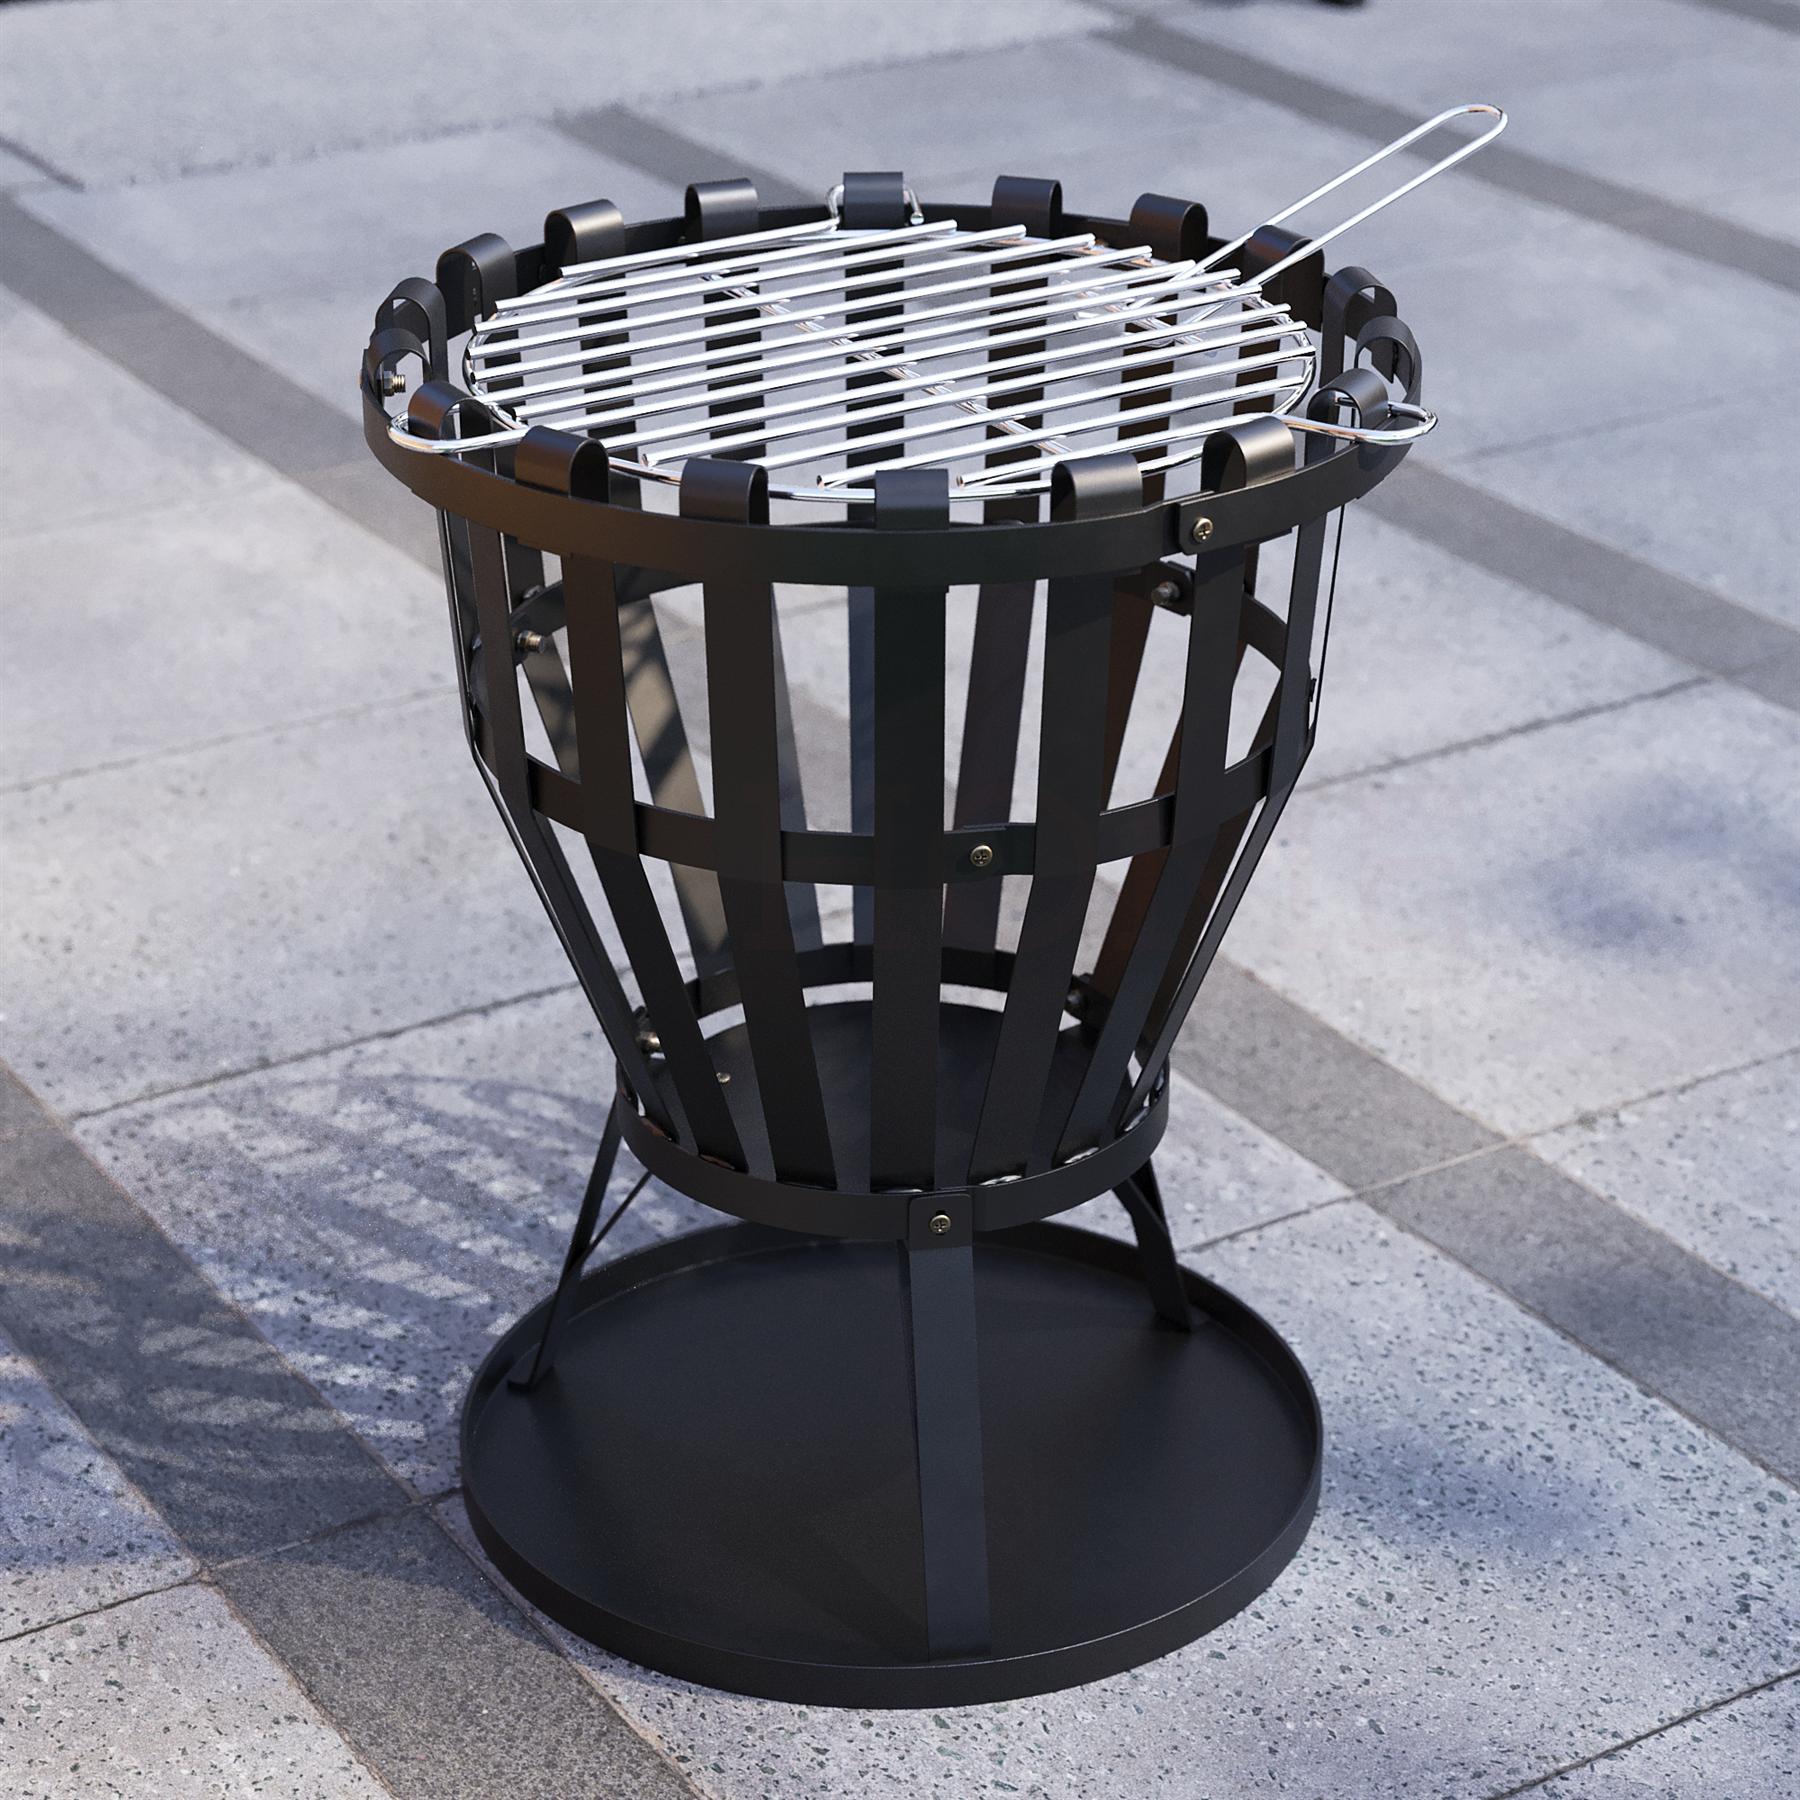 Fire Vida Steel Brazier Black Round Outdoor Fire Pit Cooking Grill